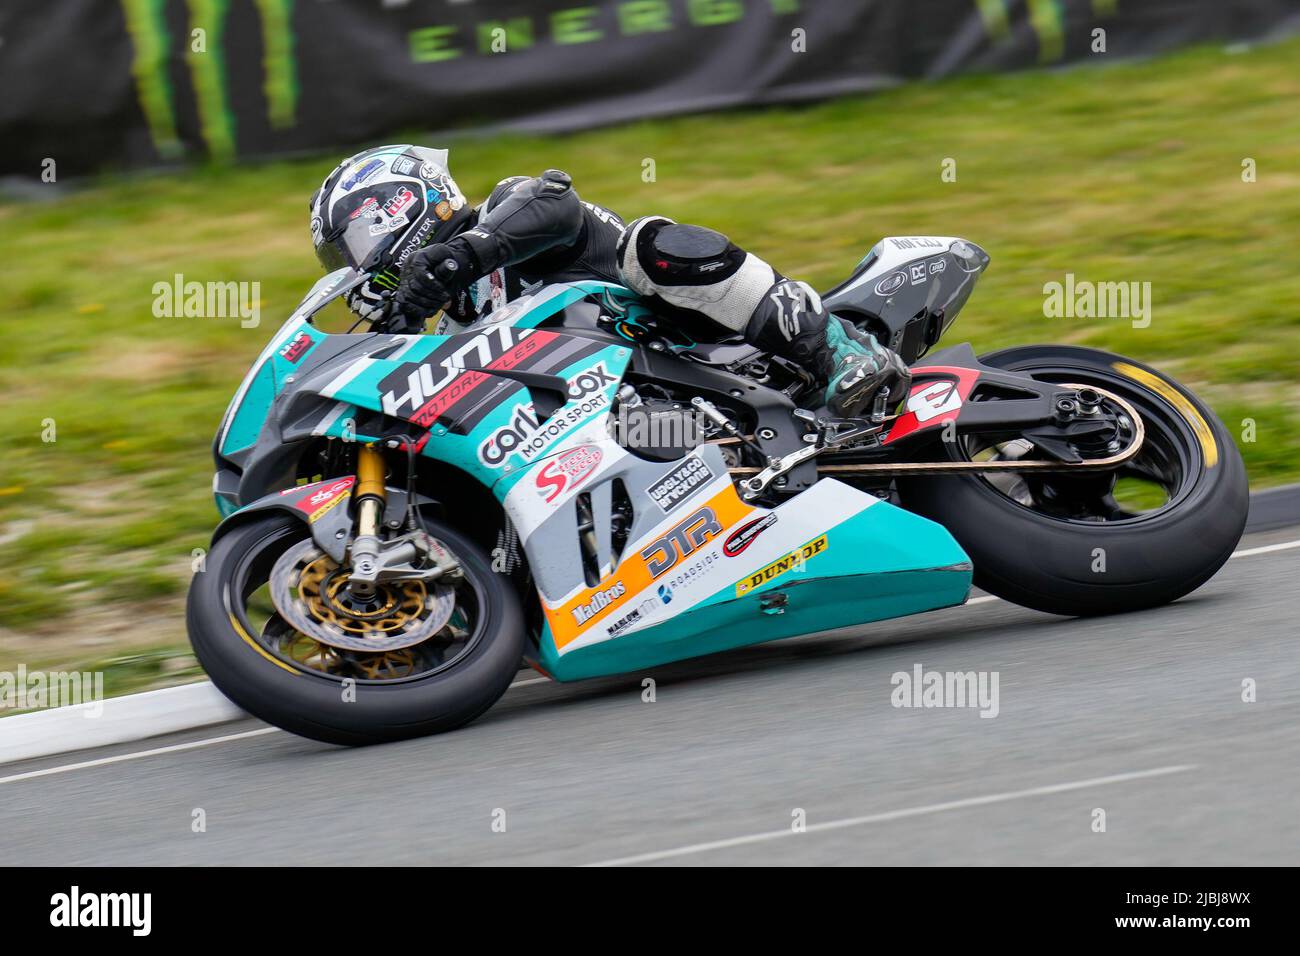 Douglas, Isle Of Man. 19th Jan, 2022. Michael Dunlop (1000 Ducati)  representing the MD Racing team during the RL360 Superstock TT Race at the  Isle of Man, Douglas, Isle of Man on